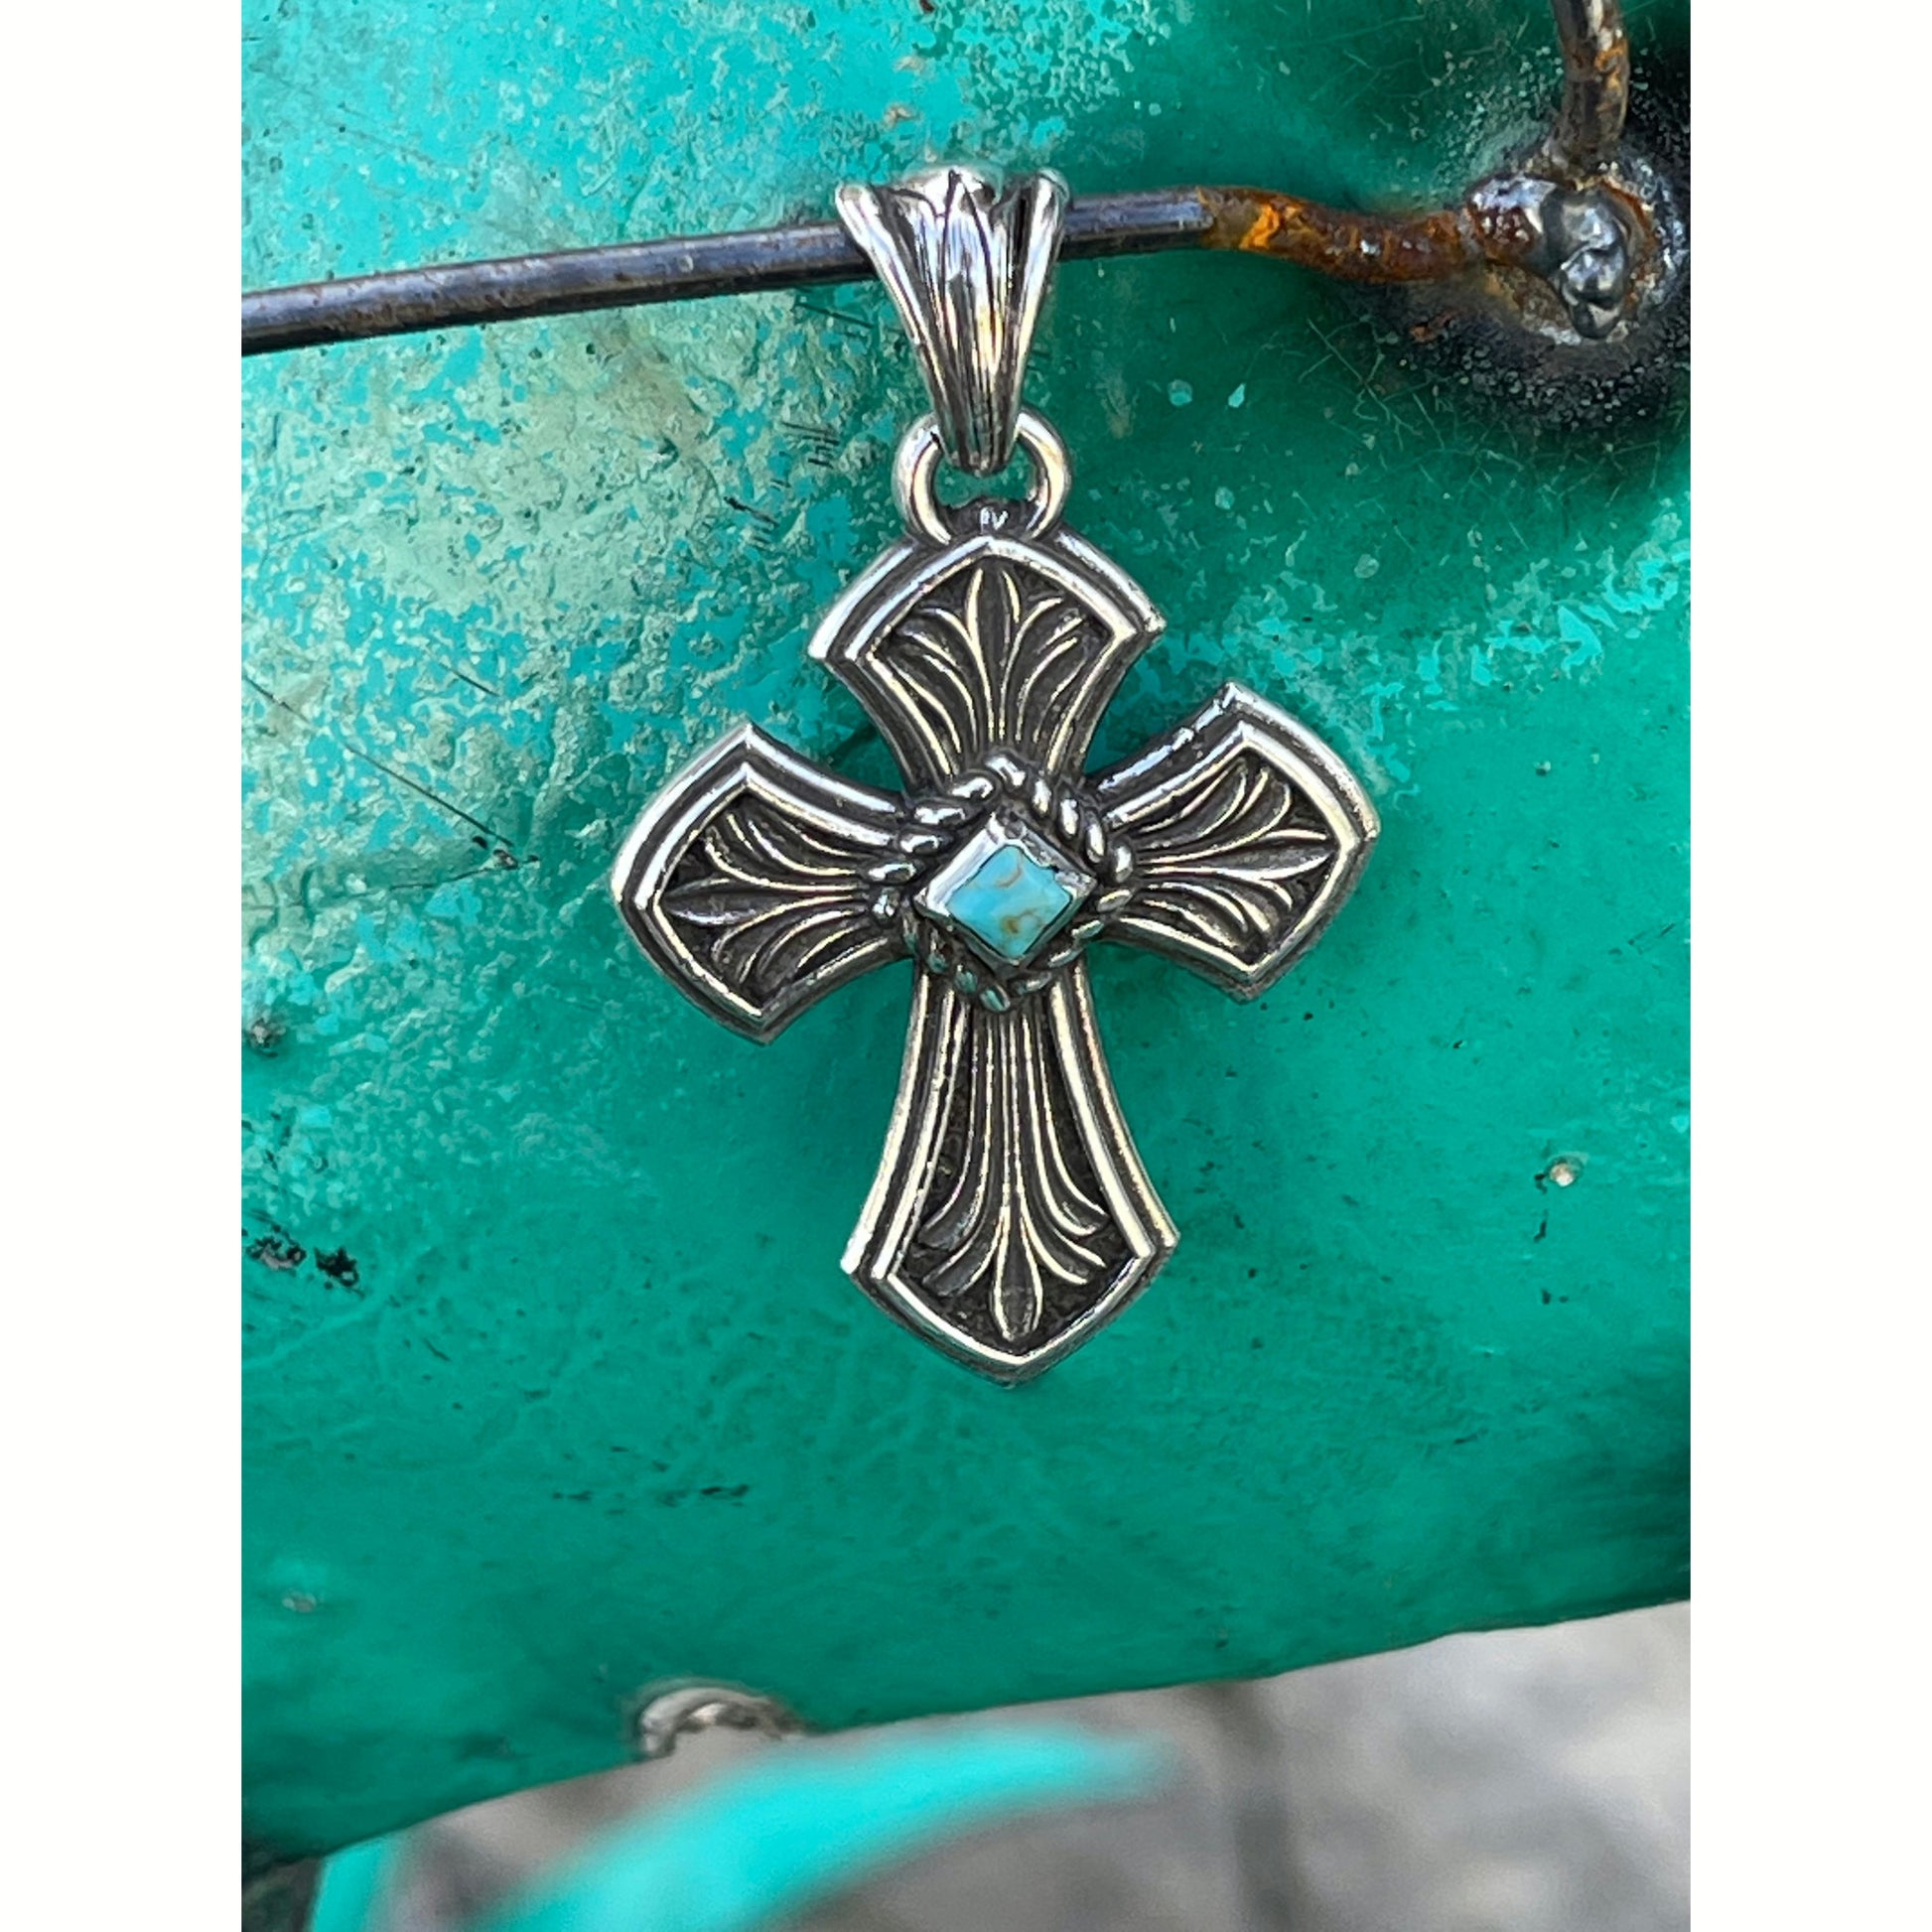 Lennon is 2”x 1” handcrafted sterling silver pendant with diamond shaped Kingman Turquoise Stone set in the middle of cross which is surrounded by a roped border.